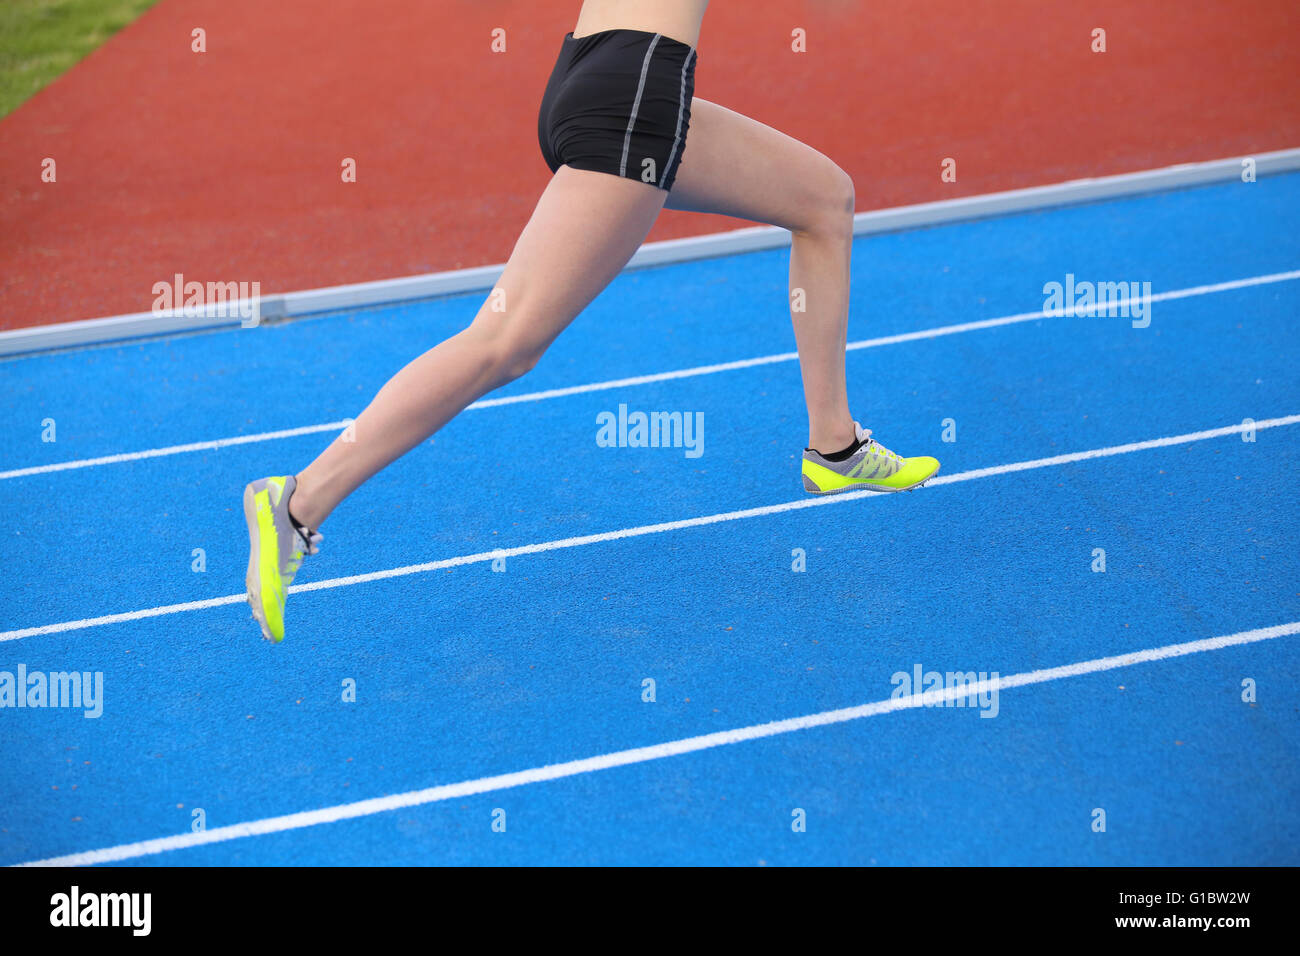 long legs of young runner running on athletic track with blue colored lanes Stock Photo